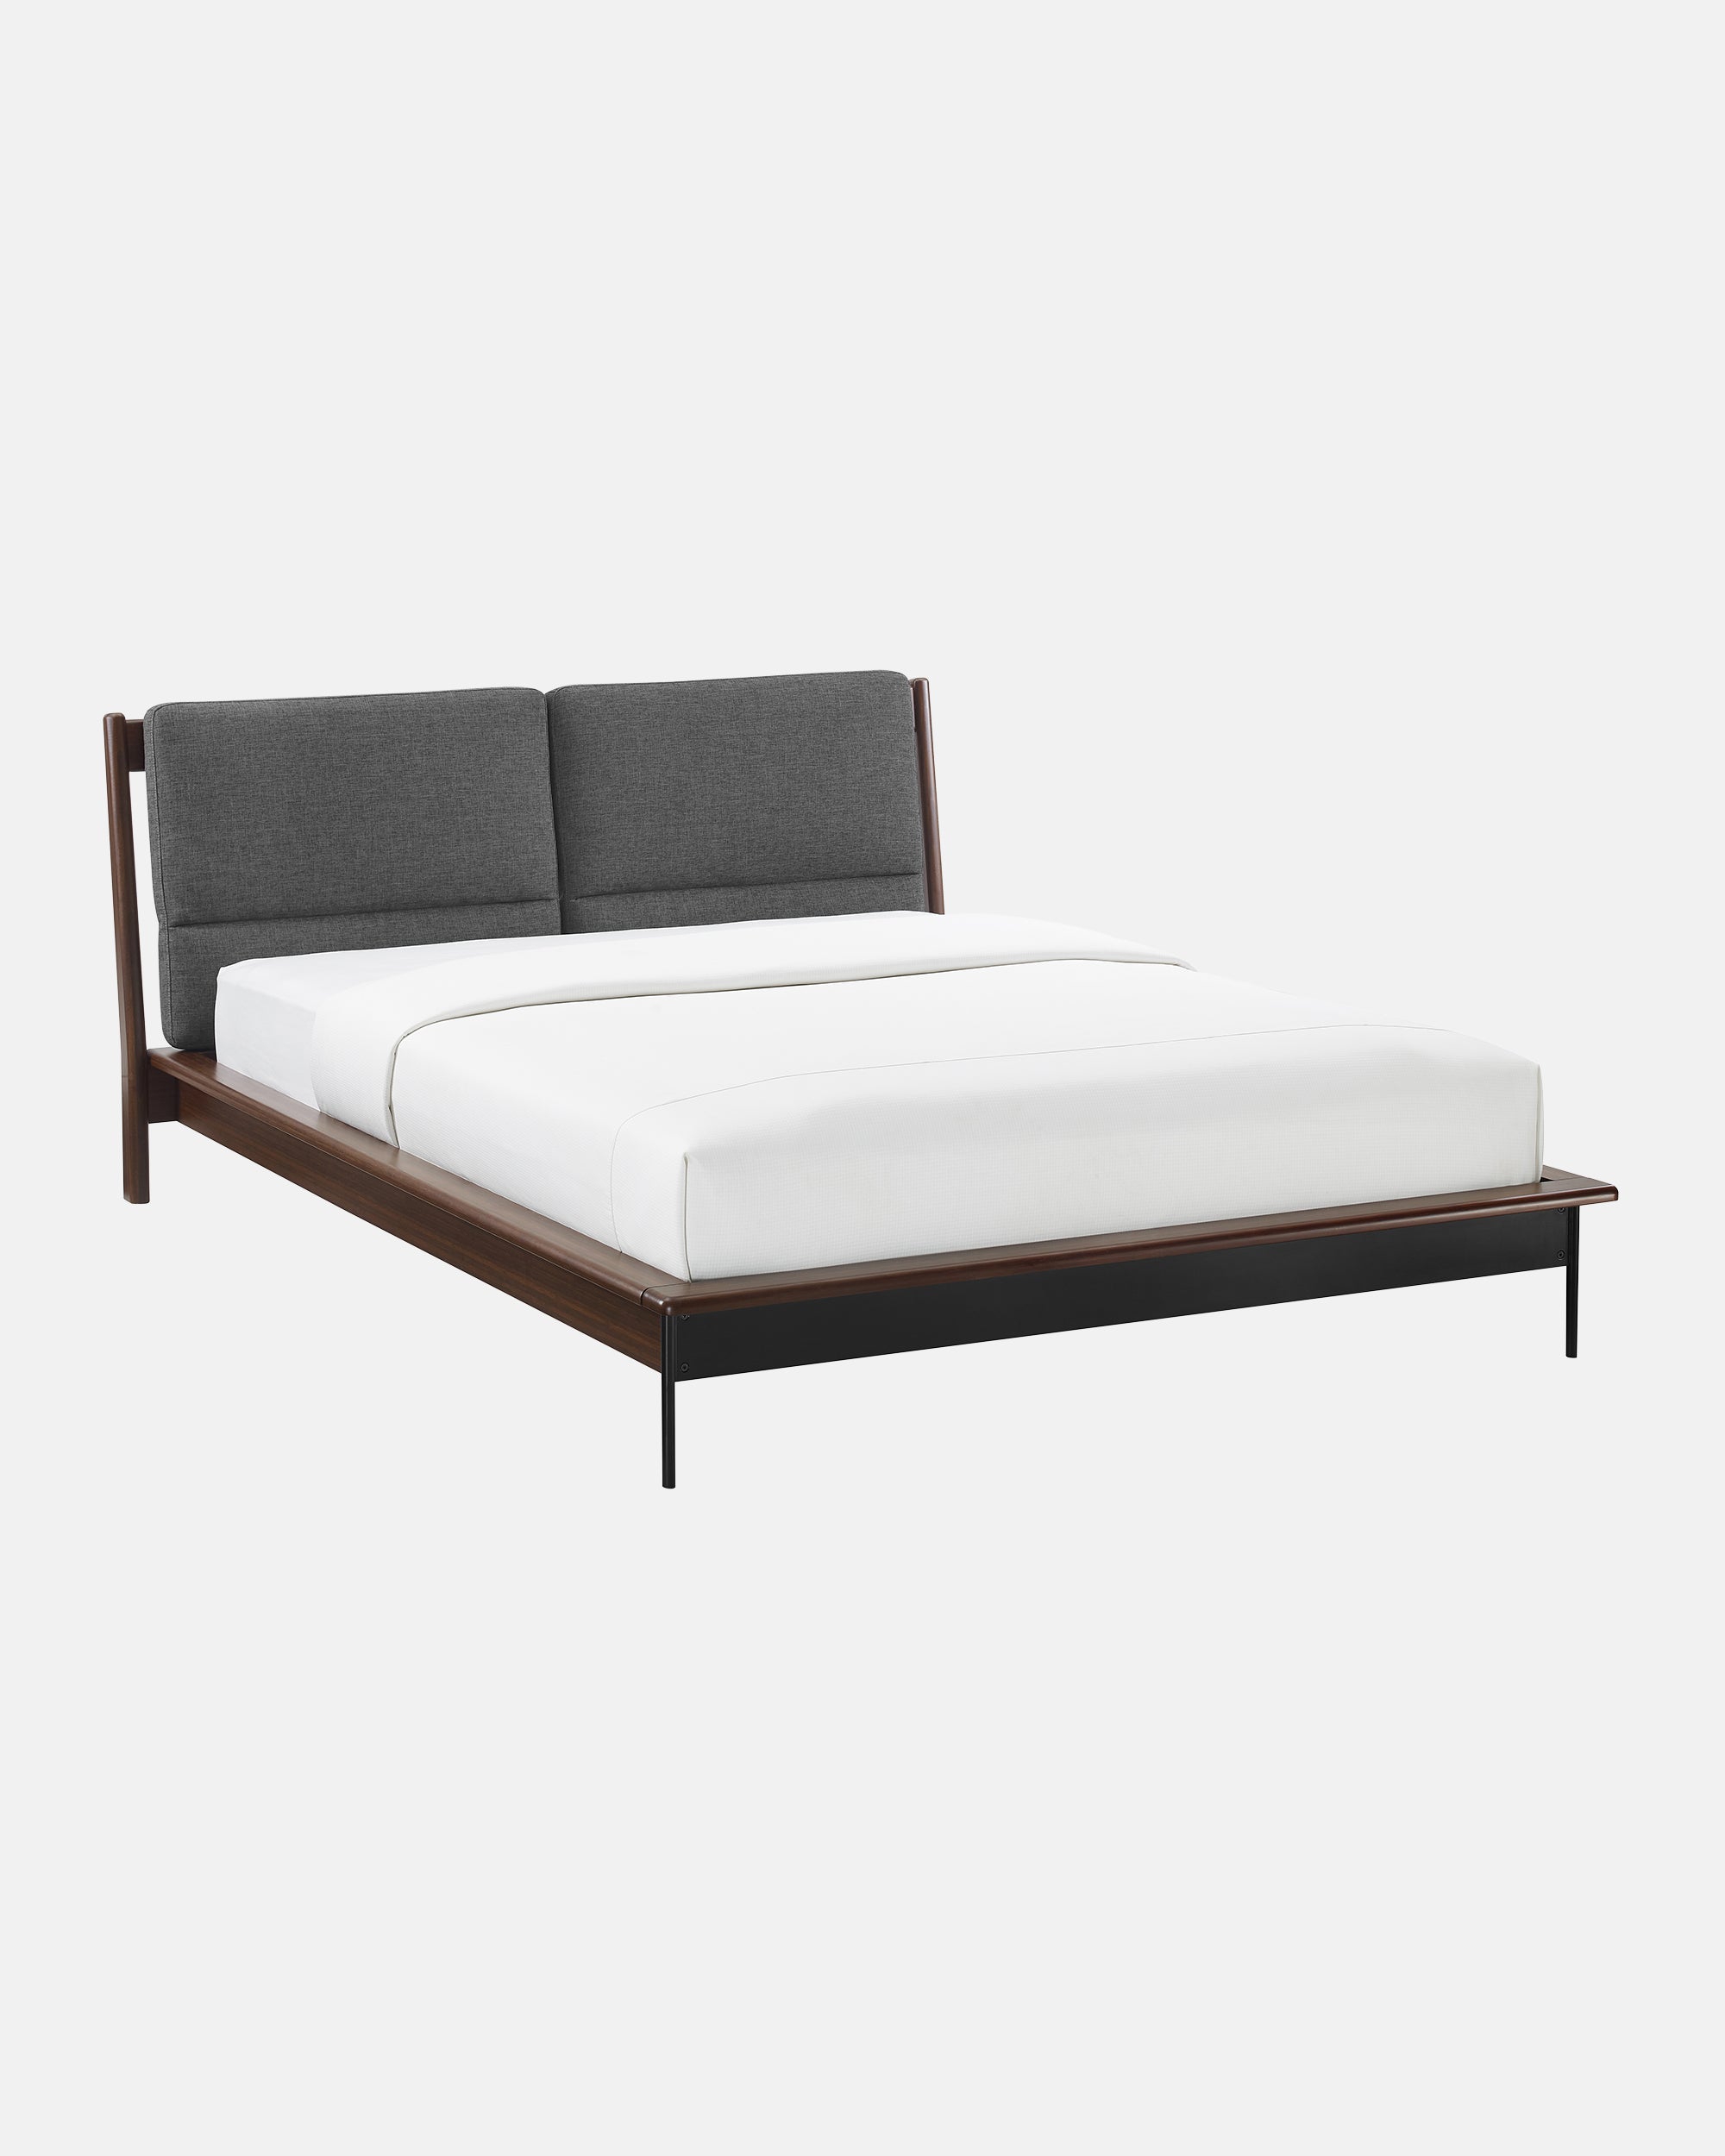 Park Avenue Bed Surround with Manual Adjustable Base